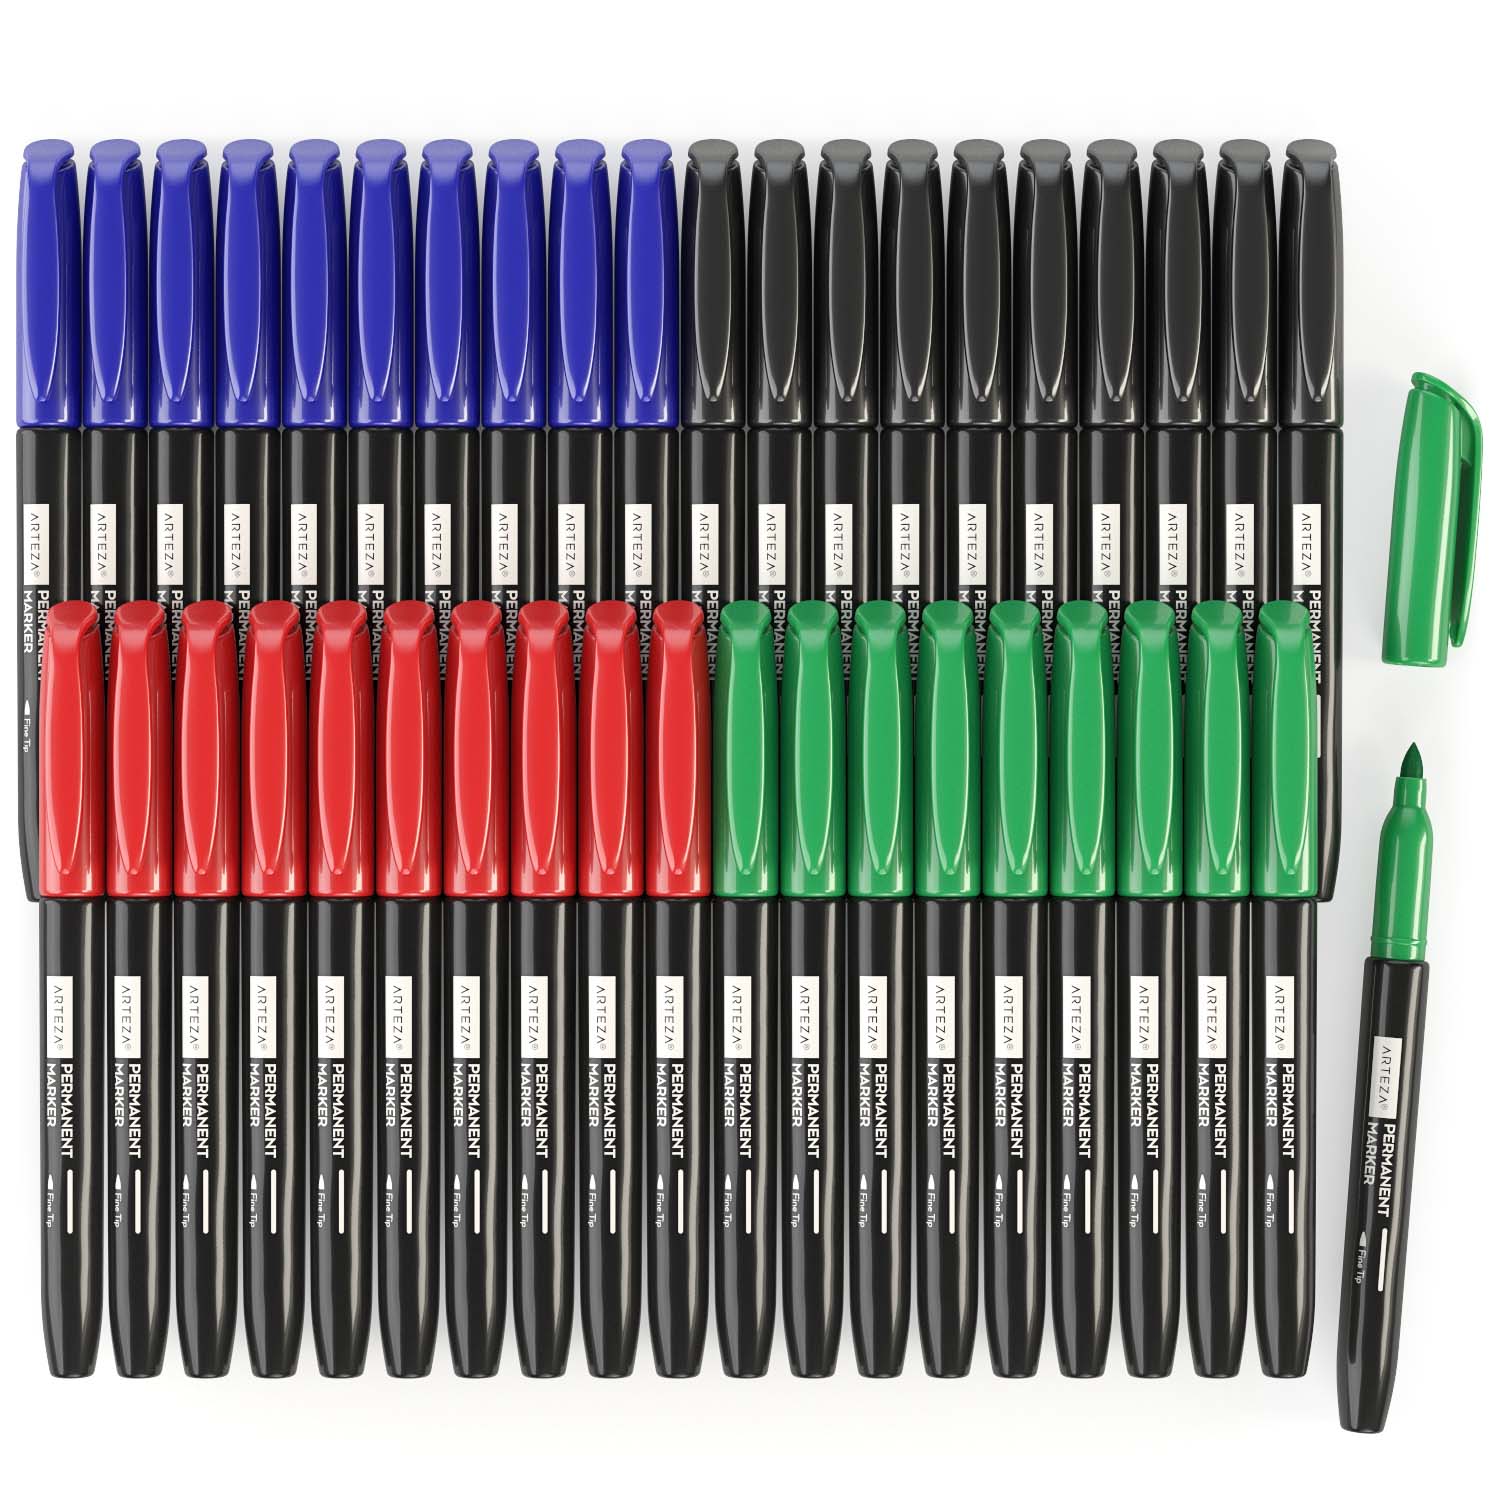 Arteza Permanent Markers Set of 60 30 Black and 30 Blue Fine Tip